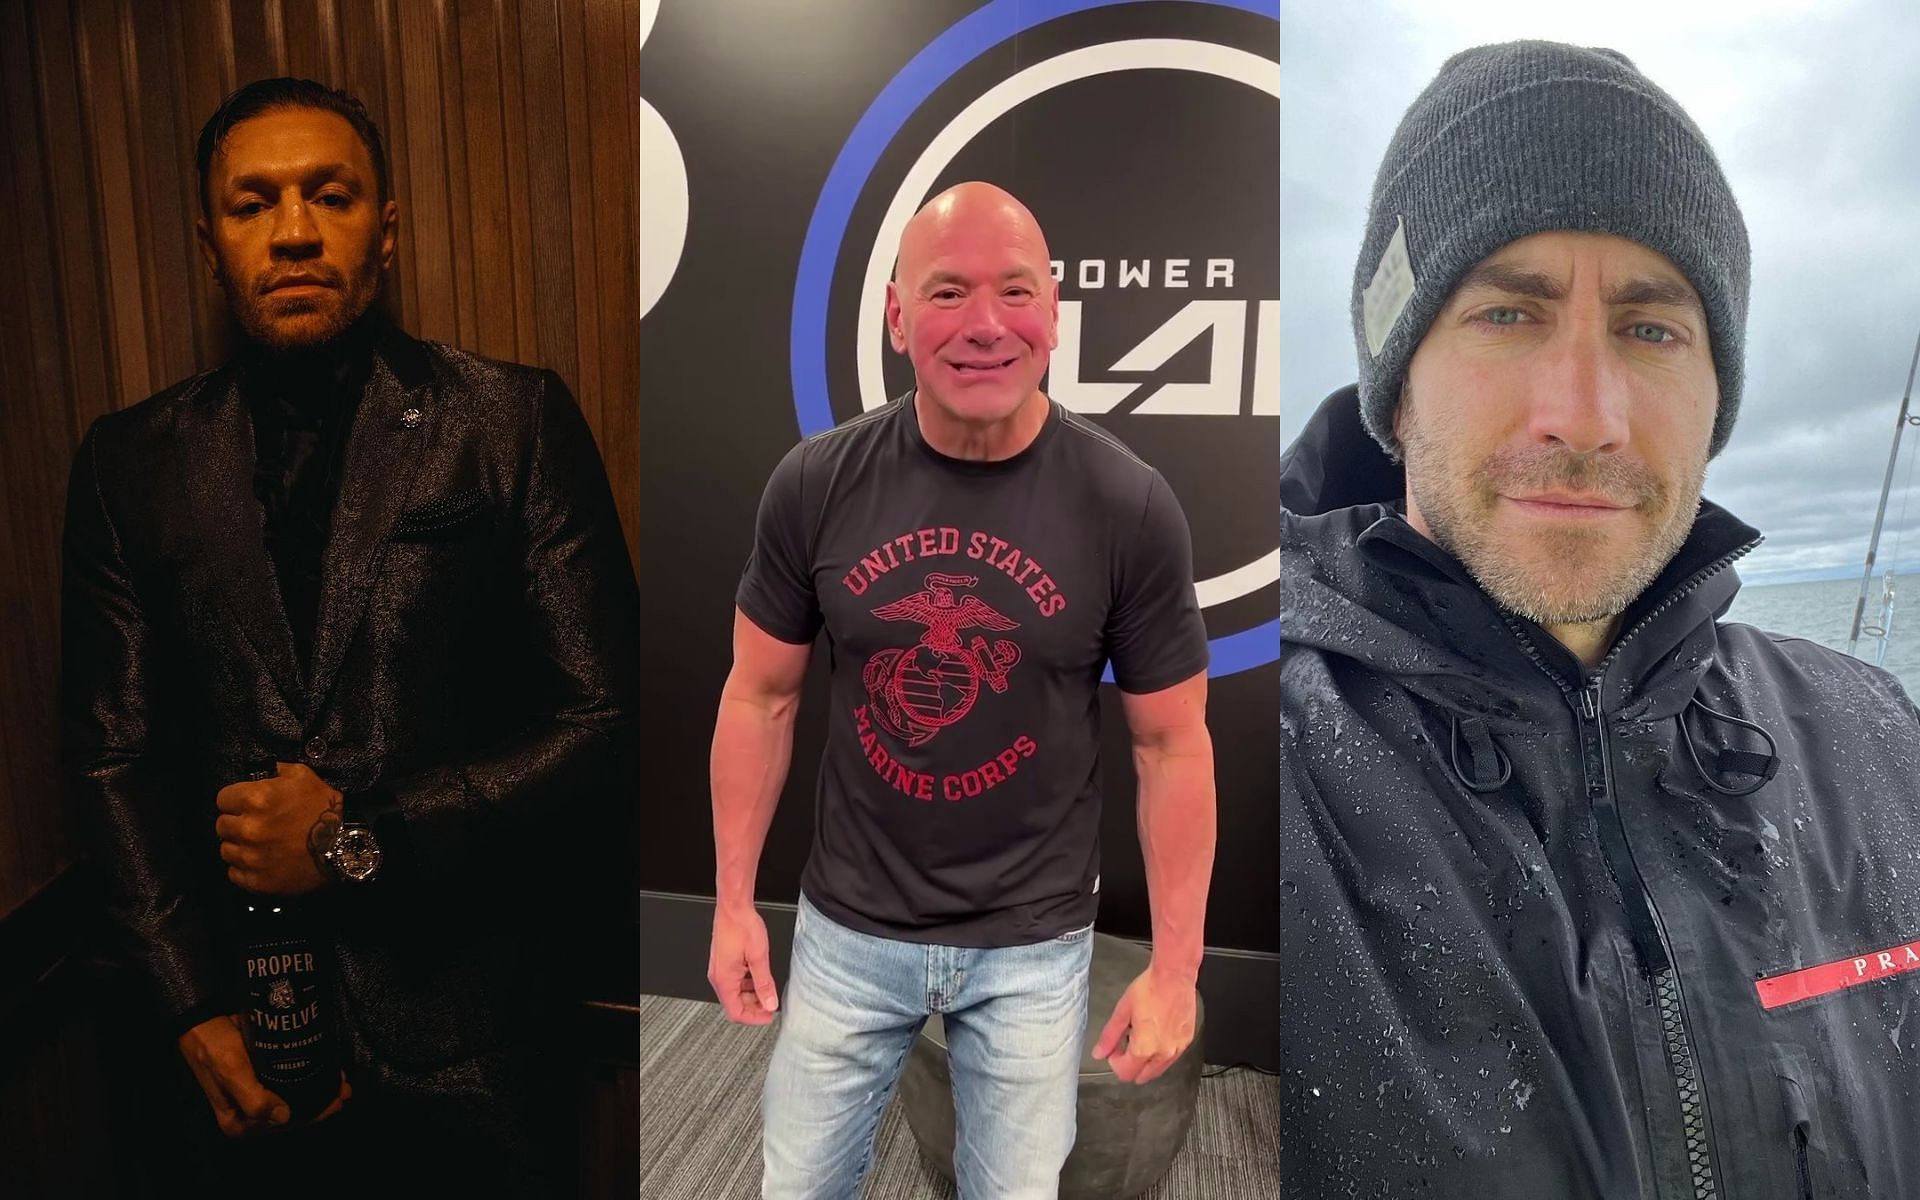 Dana White (center) talked about his experience filming Road House featuring&nbsp;Jake Gyllenhaal (right) and Conor McGregor. (left) [Images courtesy: @thenotoriousmma, @jakegyllenhaal and @danawhite on Instagram]